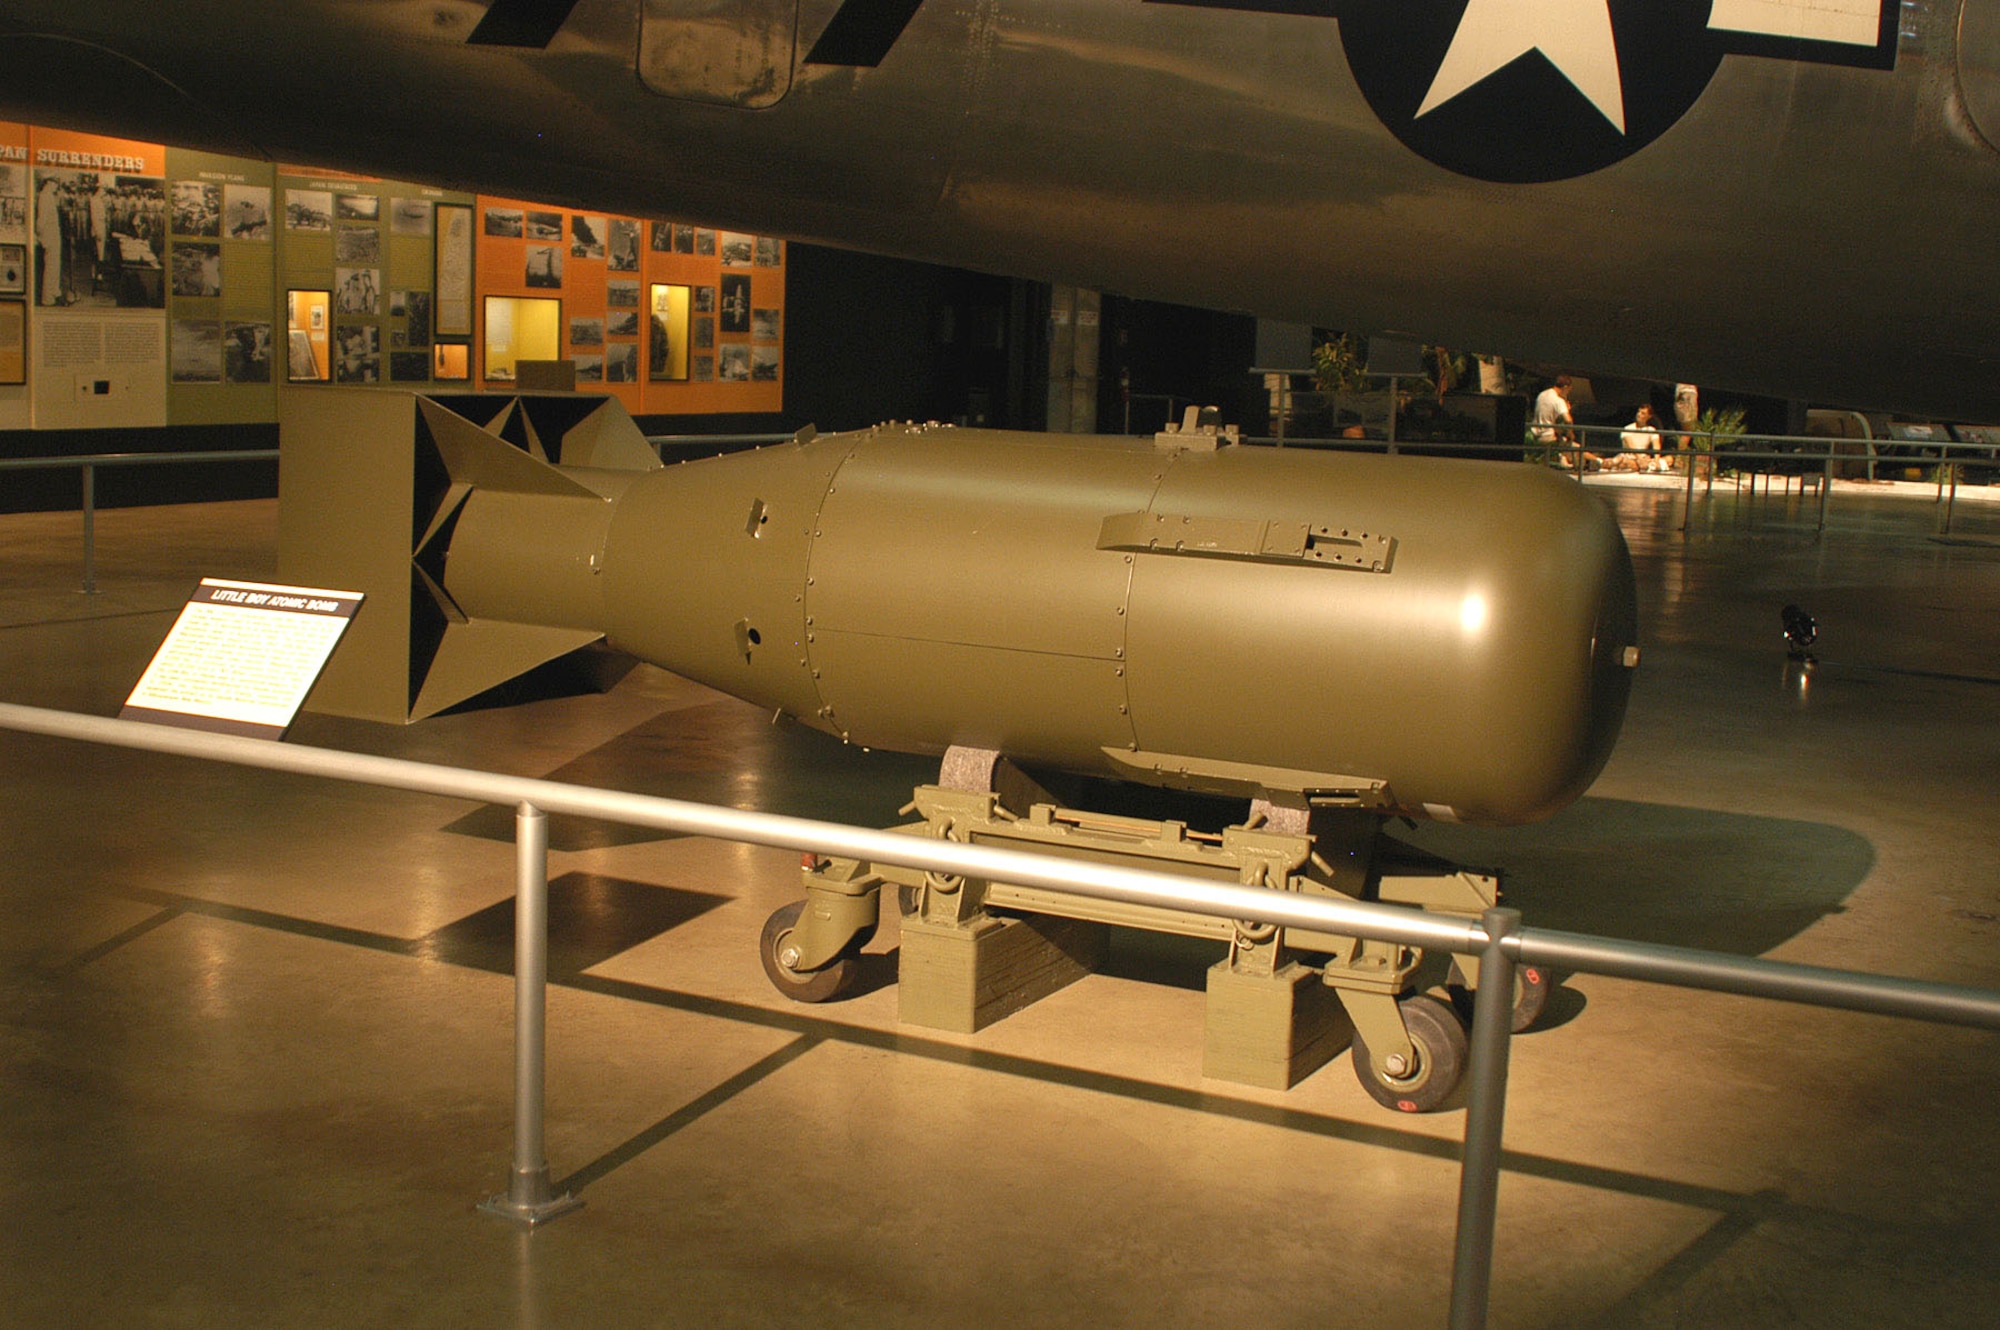 DAYTON, Ohio -- "Little Boy" atomic bomb at the National Museum of the United States Air Force. (U.S. Air Force photo)